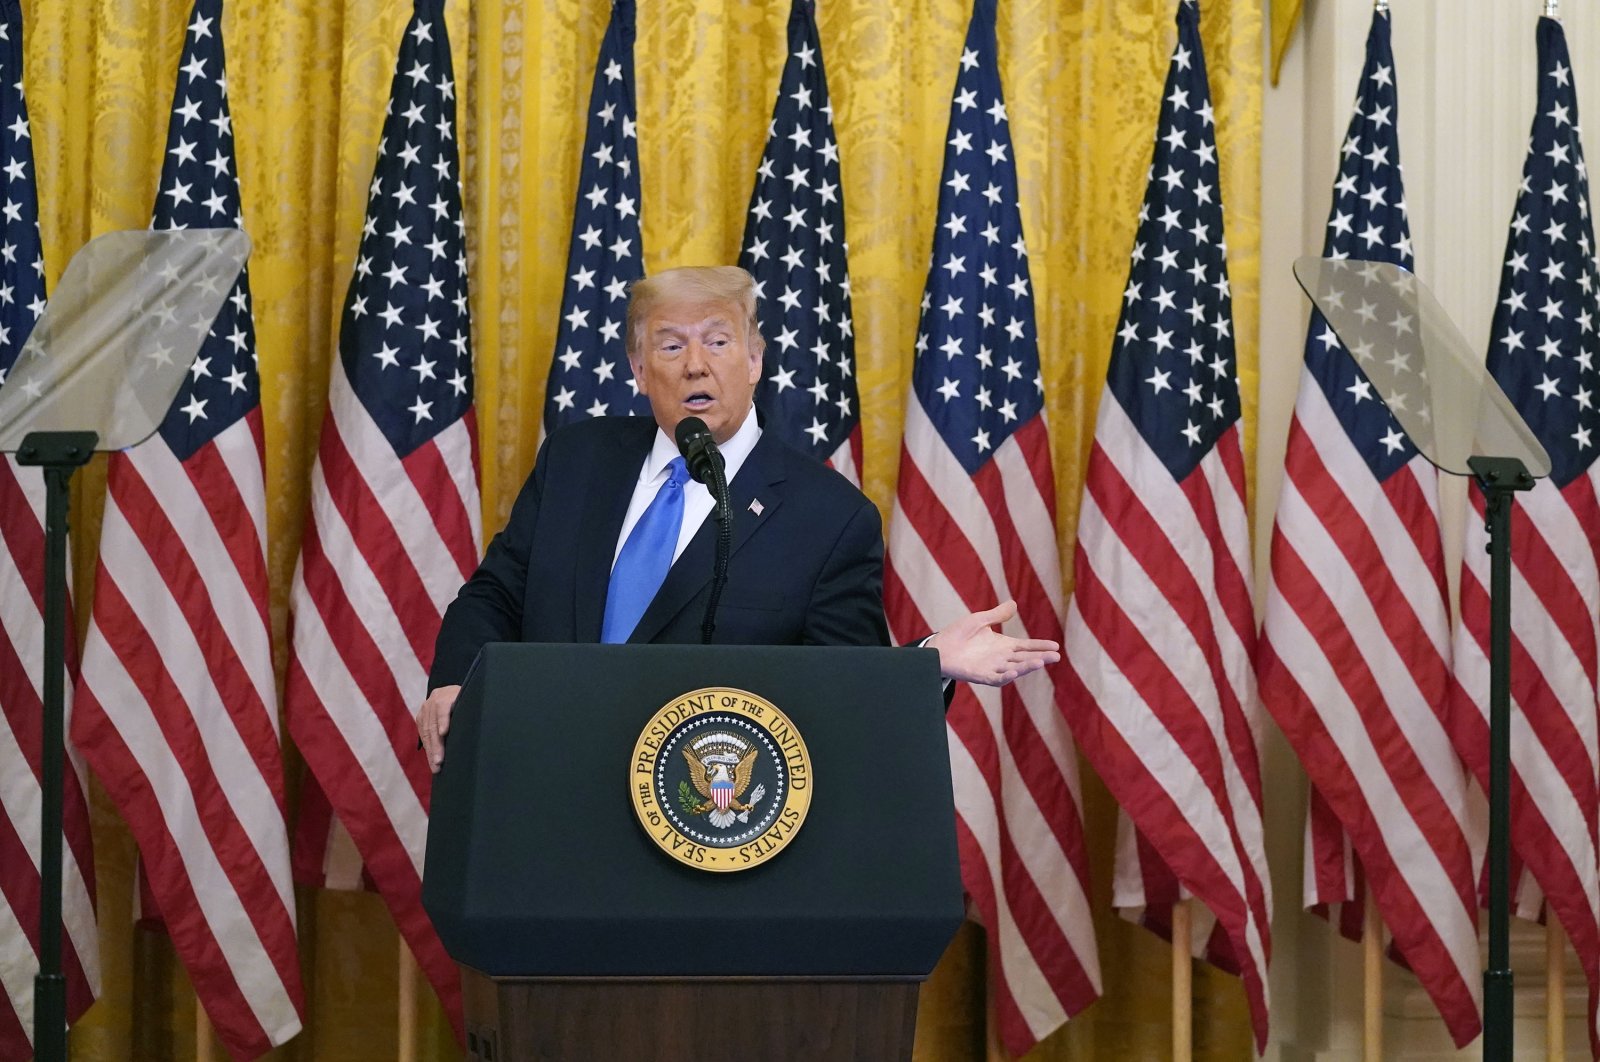 President Donald Trump speaks during an event to honor Bay of Pigs veterans, in the East Room of the White House, in Washington, Sept. 23, 2020. (AP Photo)